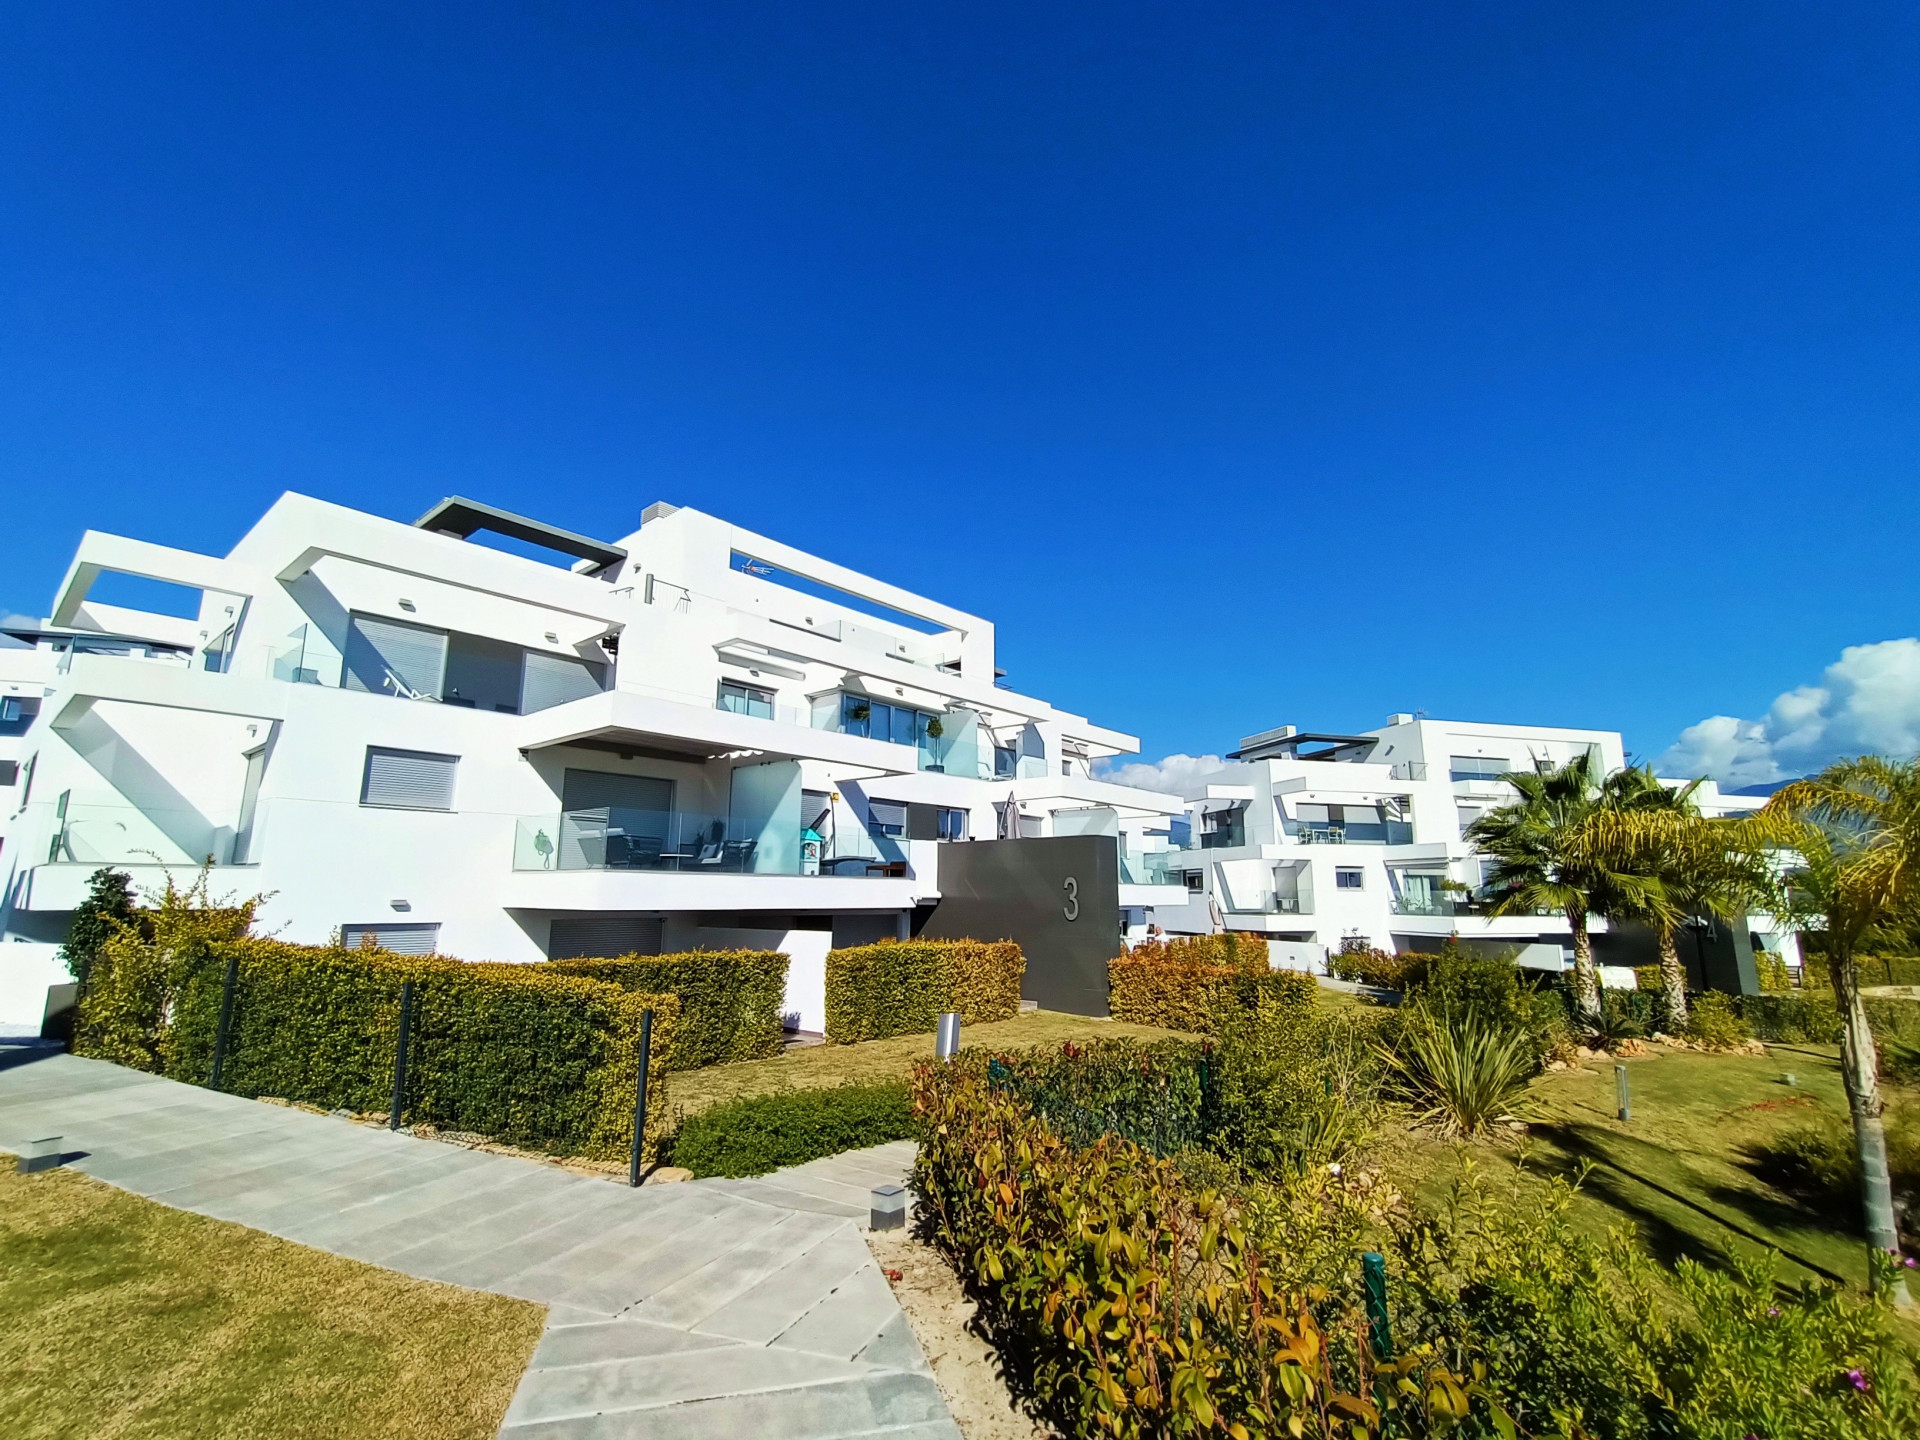 Modern duplex penthouse in a new complex close to a number of golf courses and a short drive to amenities & restaurants